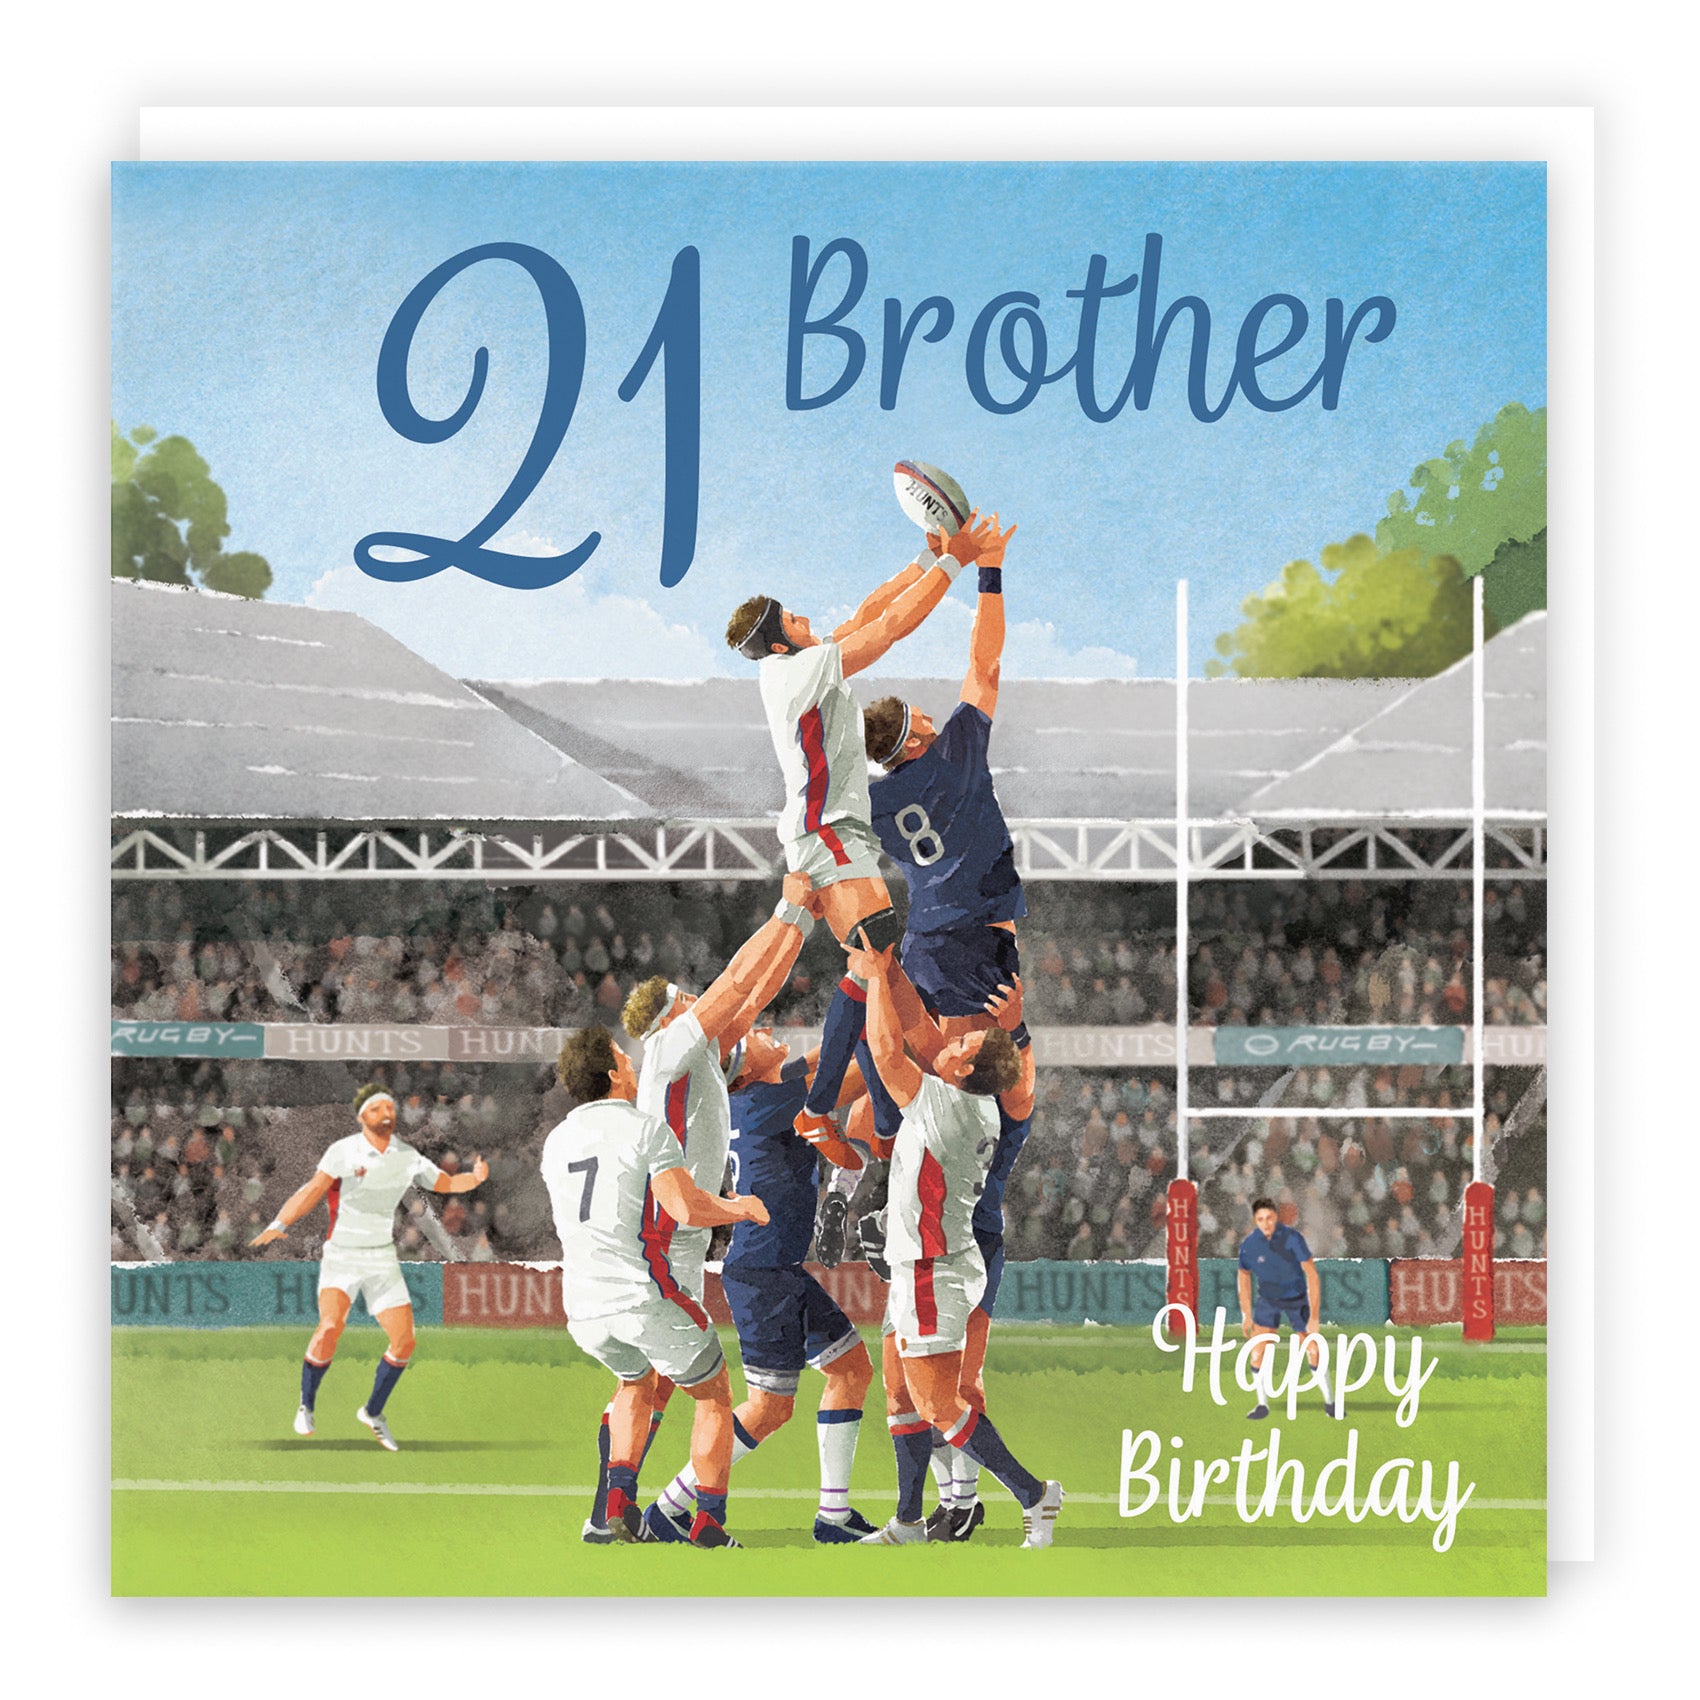 21st Brother Rugby Birthday Card Milo's Gallery - Default Title (B0CPR573ZR)